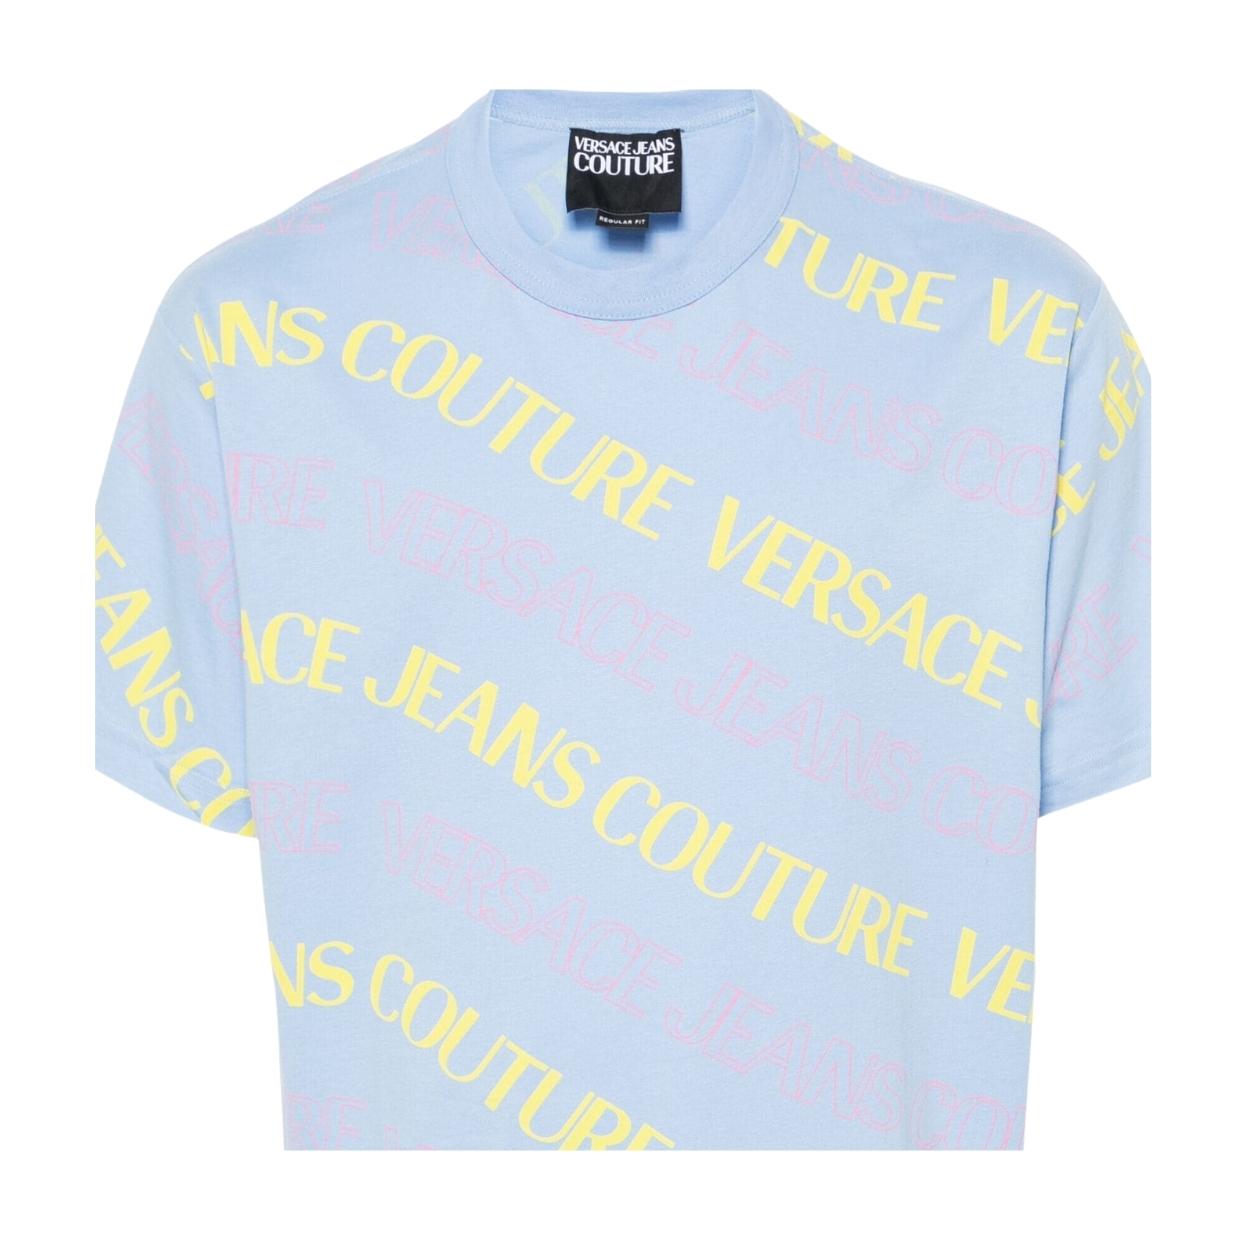 Versace Jeans Couture All-Over Print Logo Blue T-Shirt